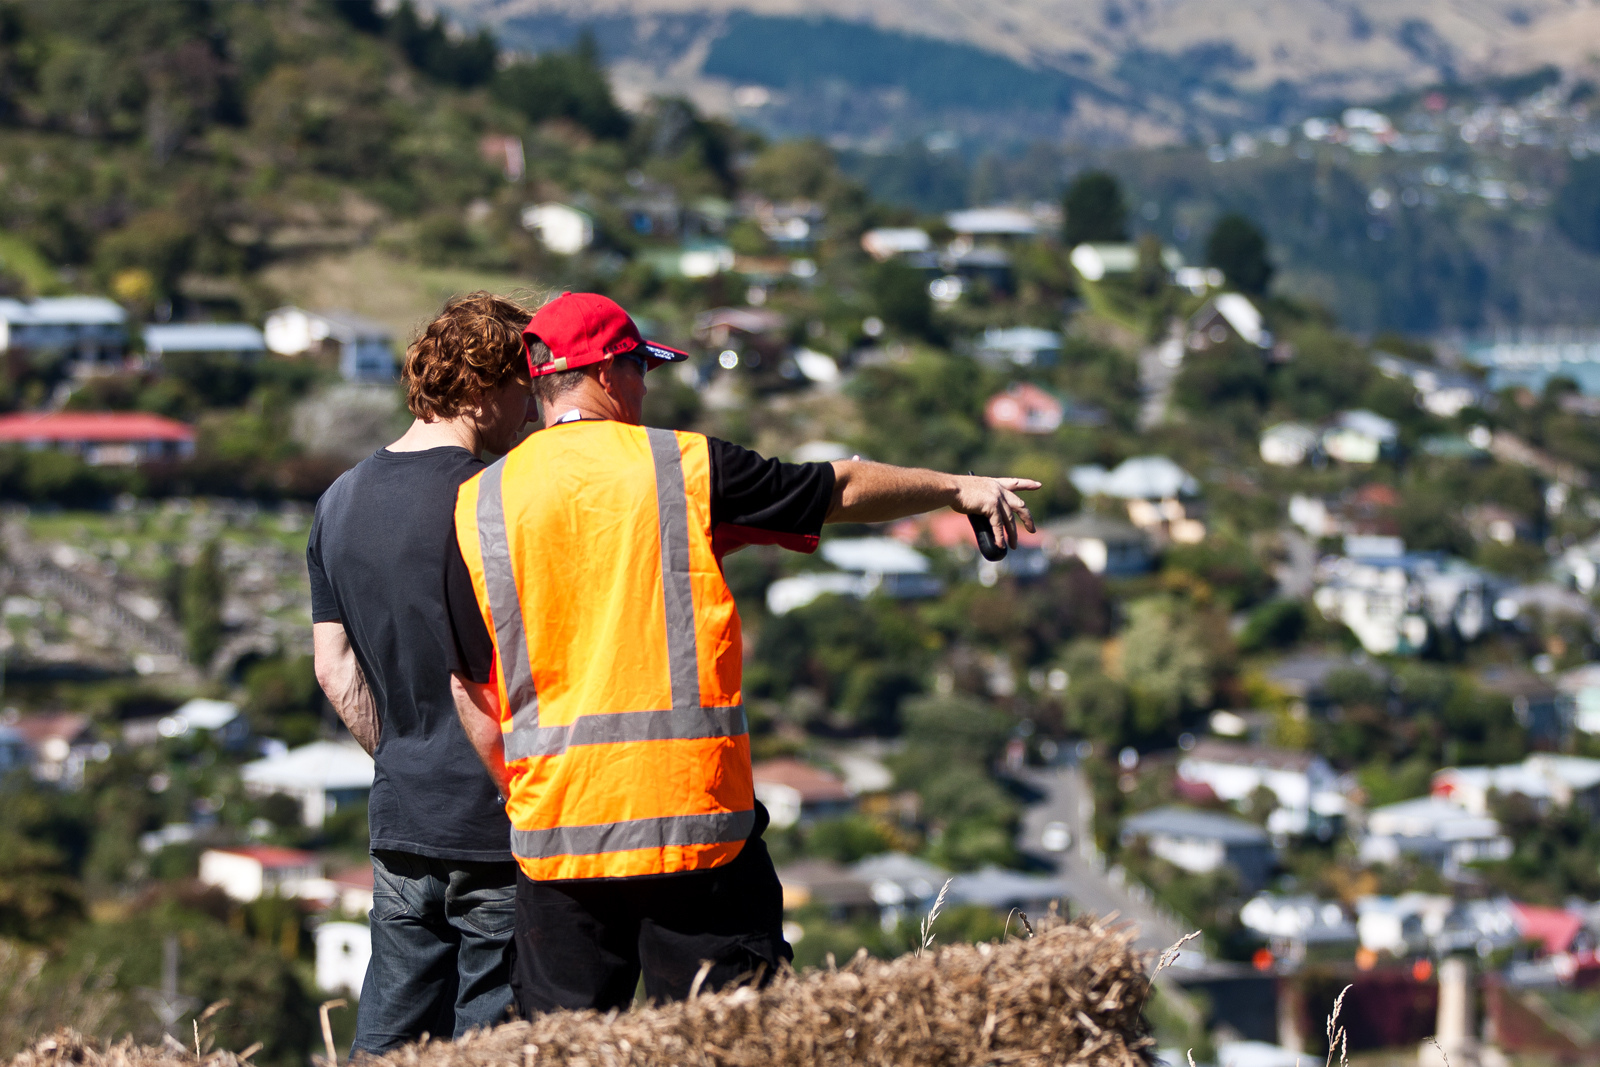 The first Urban Downhill race in New Zealand Shot by Nick Middleton and Kirsty Sheppard

http://www.endeavourmp.com/

© 2012 Endeavour Media &amp; Photographics